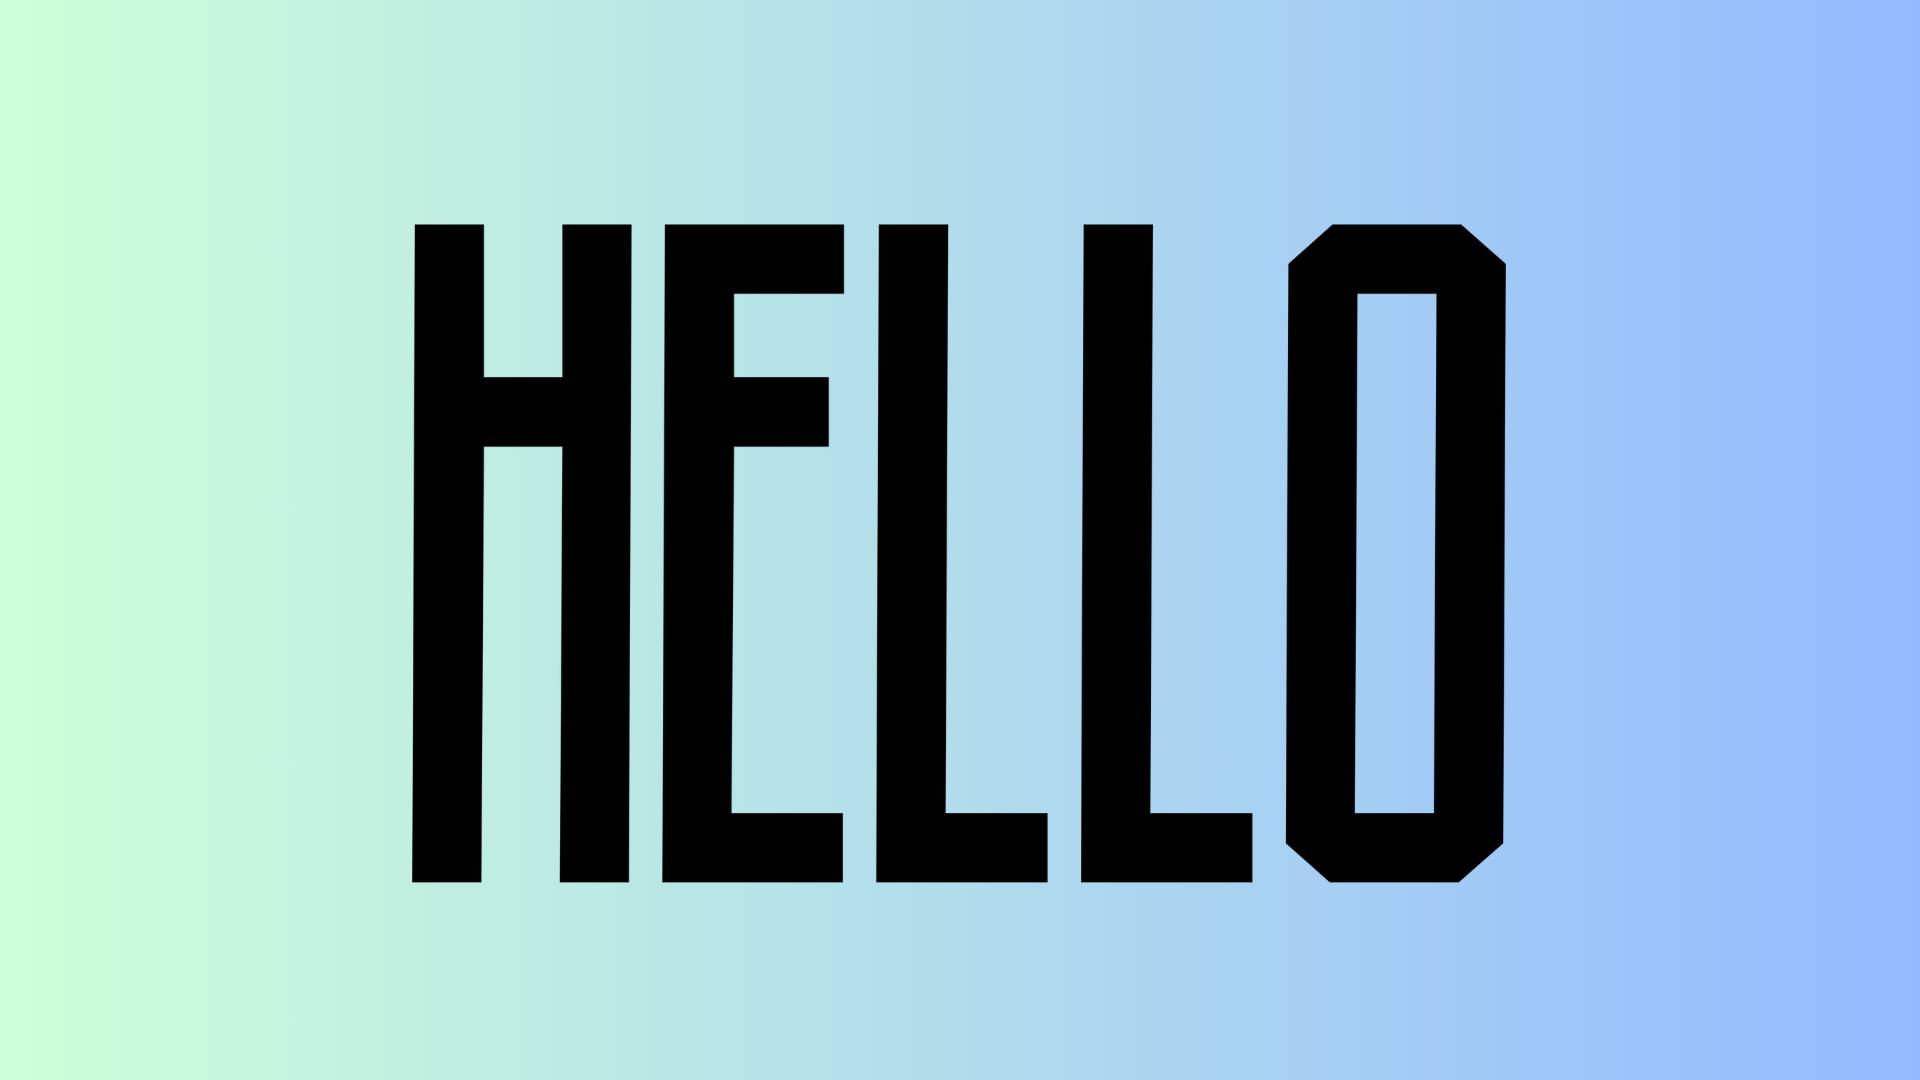 create stretch text effect in Photoshop